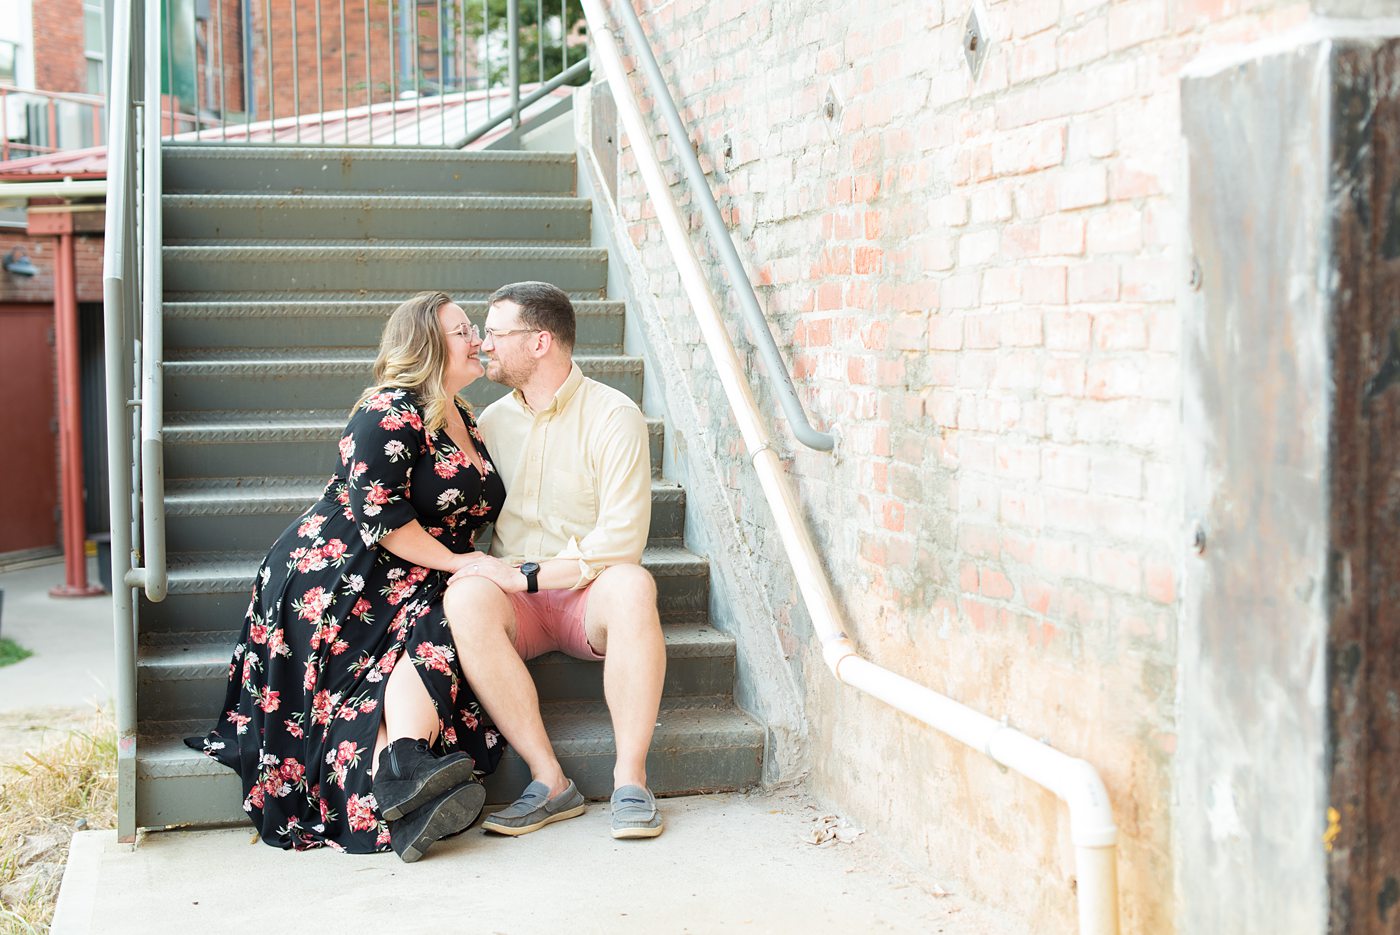 Durham North Carolina wedding photographer, Mikkel Paige Photography, captures engagement-like photos for a couple in the downtown area of this NC city for a two year anniversary couples session with Nikki and her husband, Jason, of Fancy This Photography. #mikkelpaige #DurhamEngagementPhotos #durhamphotographysession #DowntownDurham #DurhamWeddingPhotographer